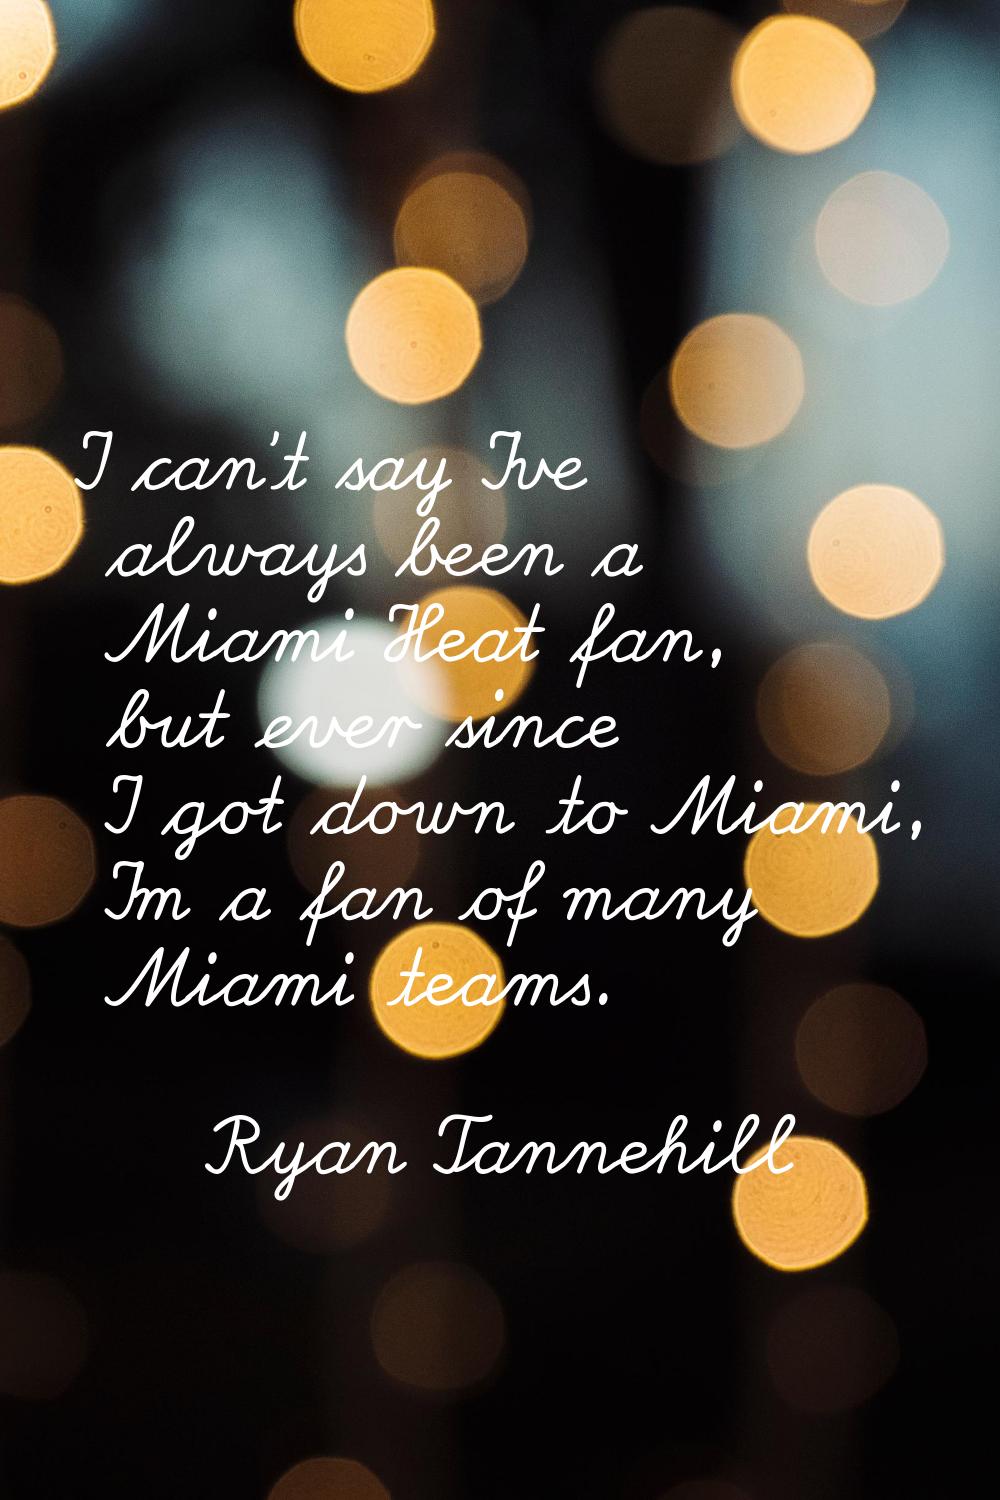 I can't say I've always been a Miami Heat fan, but ever since I got down to Miami, I'm a fan of man